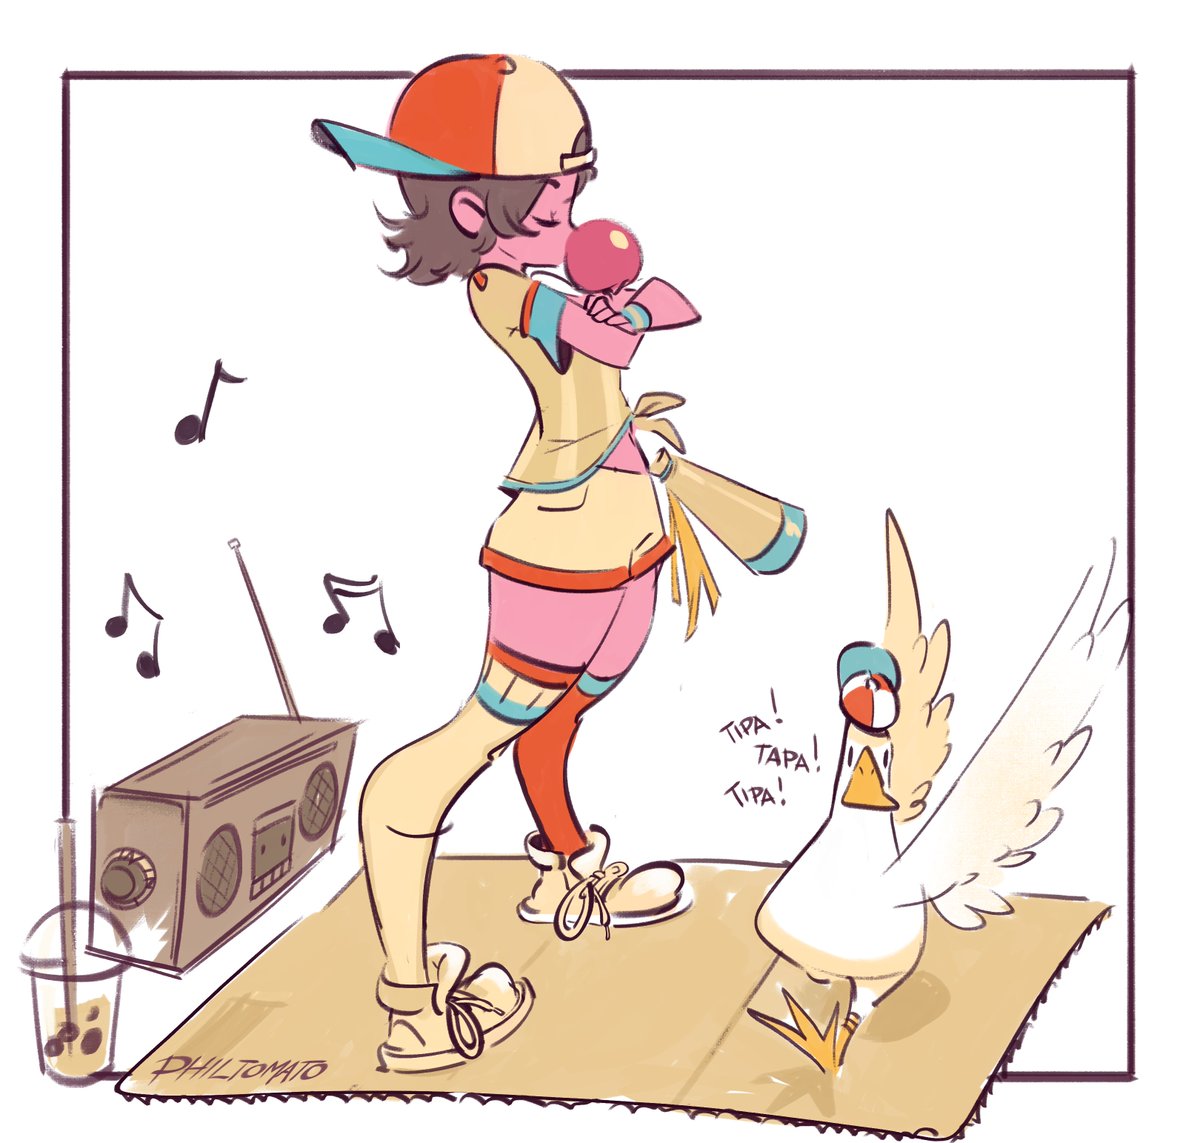 Did Shuba for today's stream. Just can't get enough of that dancing duck. <3 https://t.co/2aoPuEqJbC 